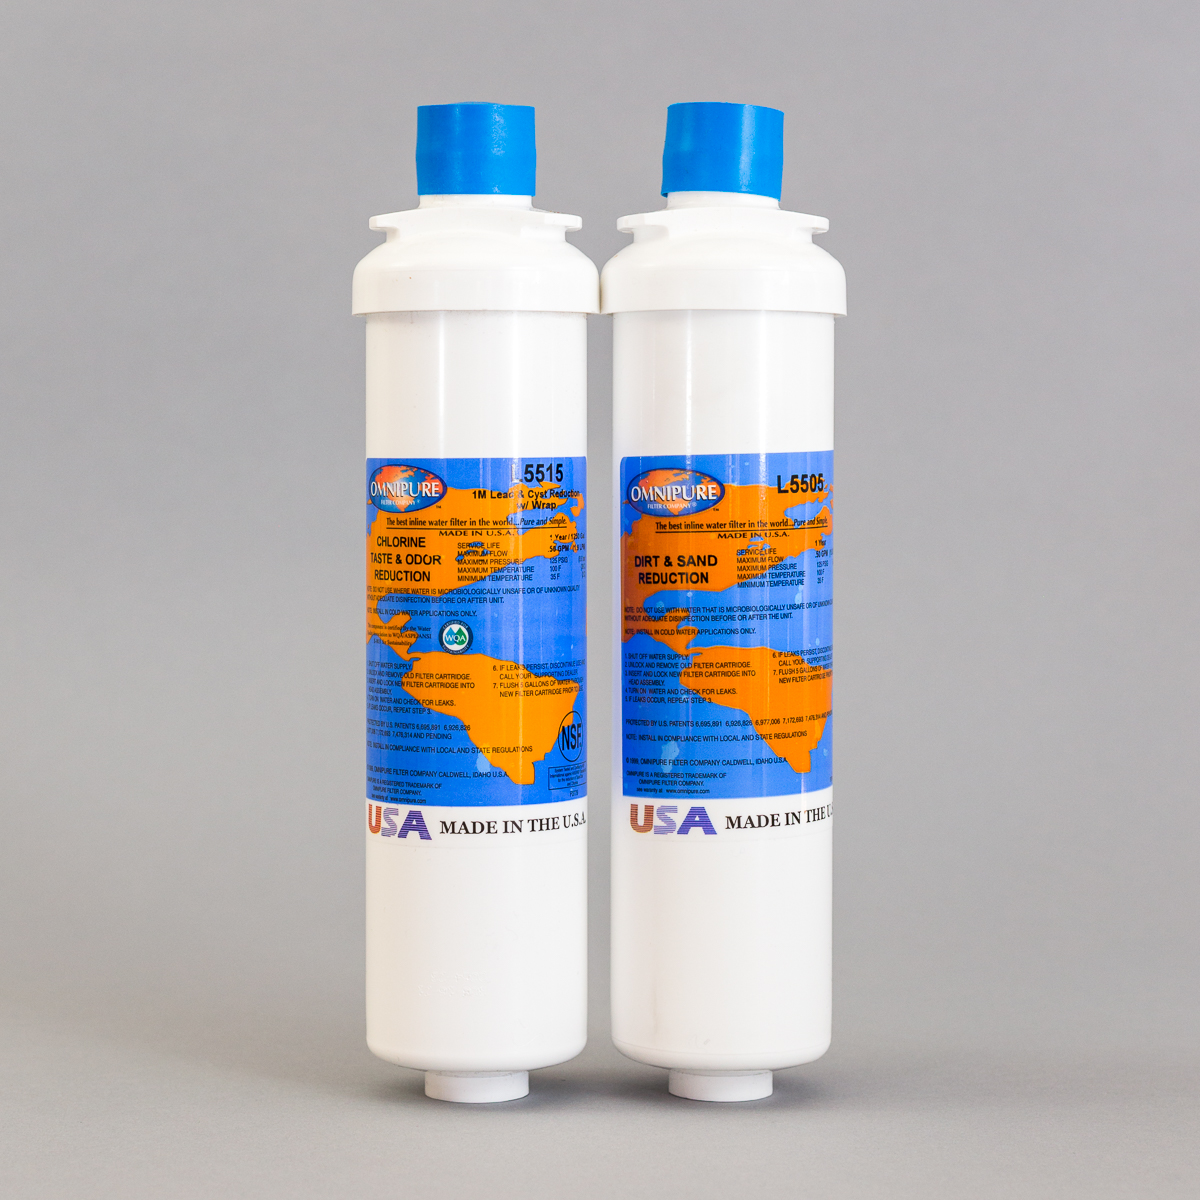 Bottleless Water Cooler Filters Replacement A4 Filter and A5 Filter made by  Glacier Fresh